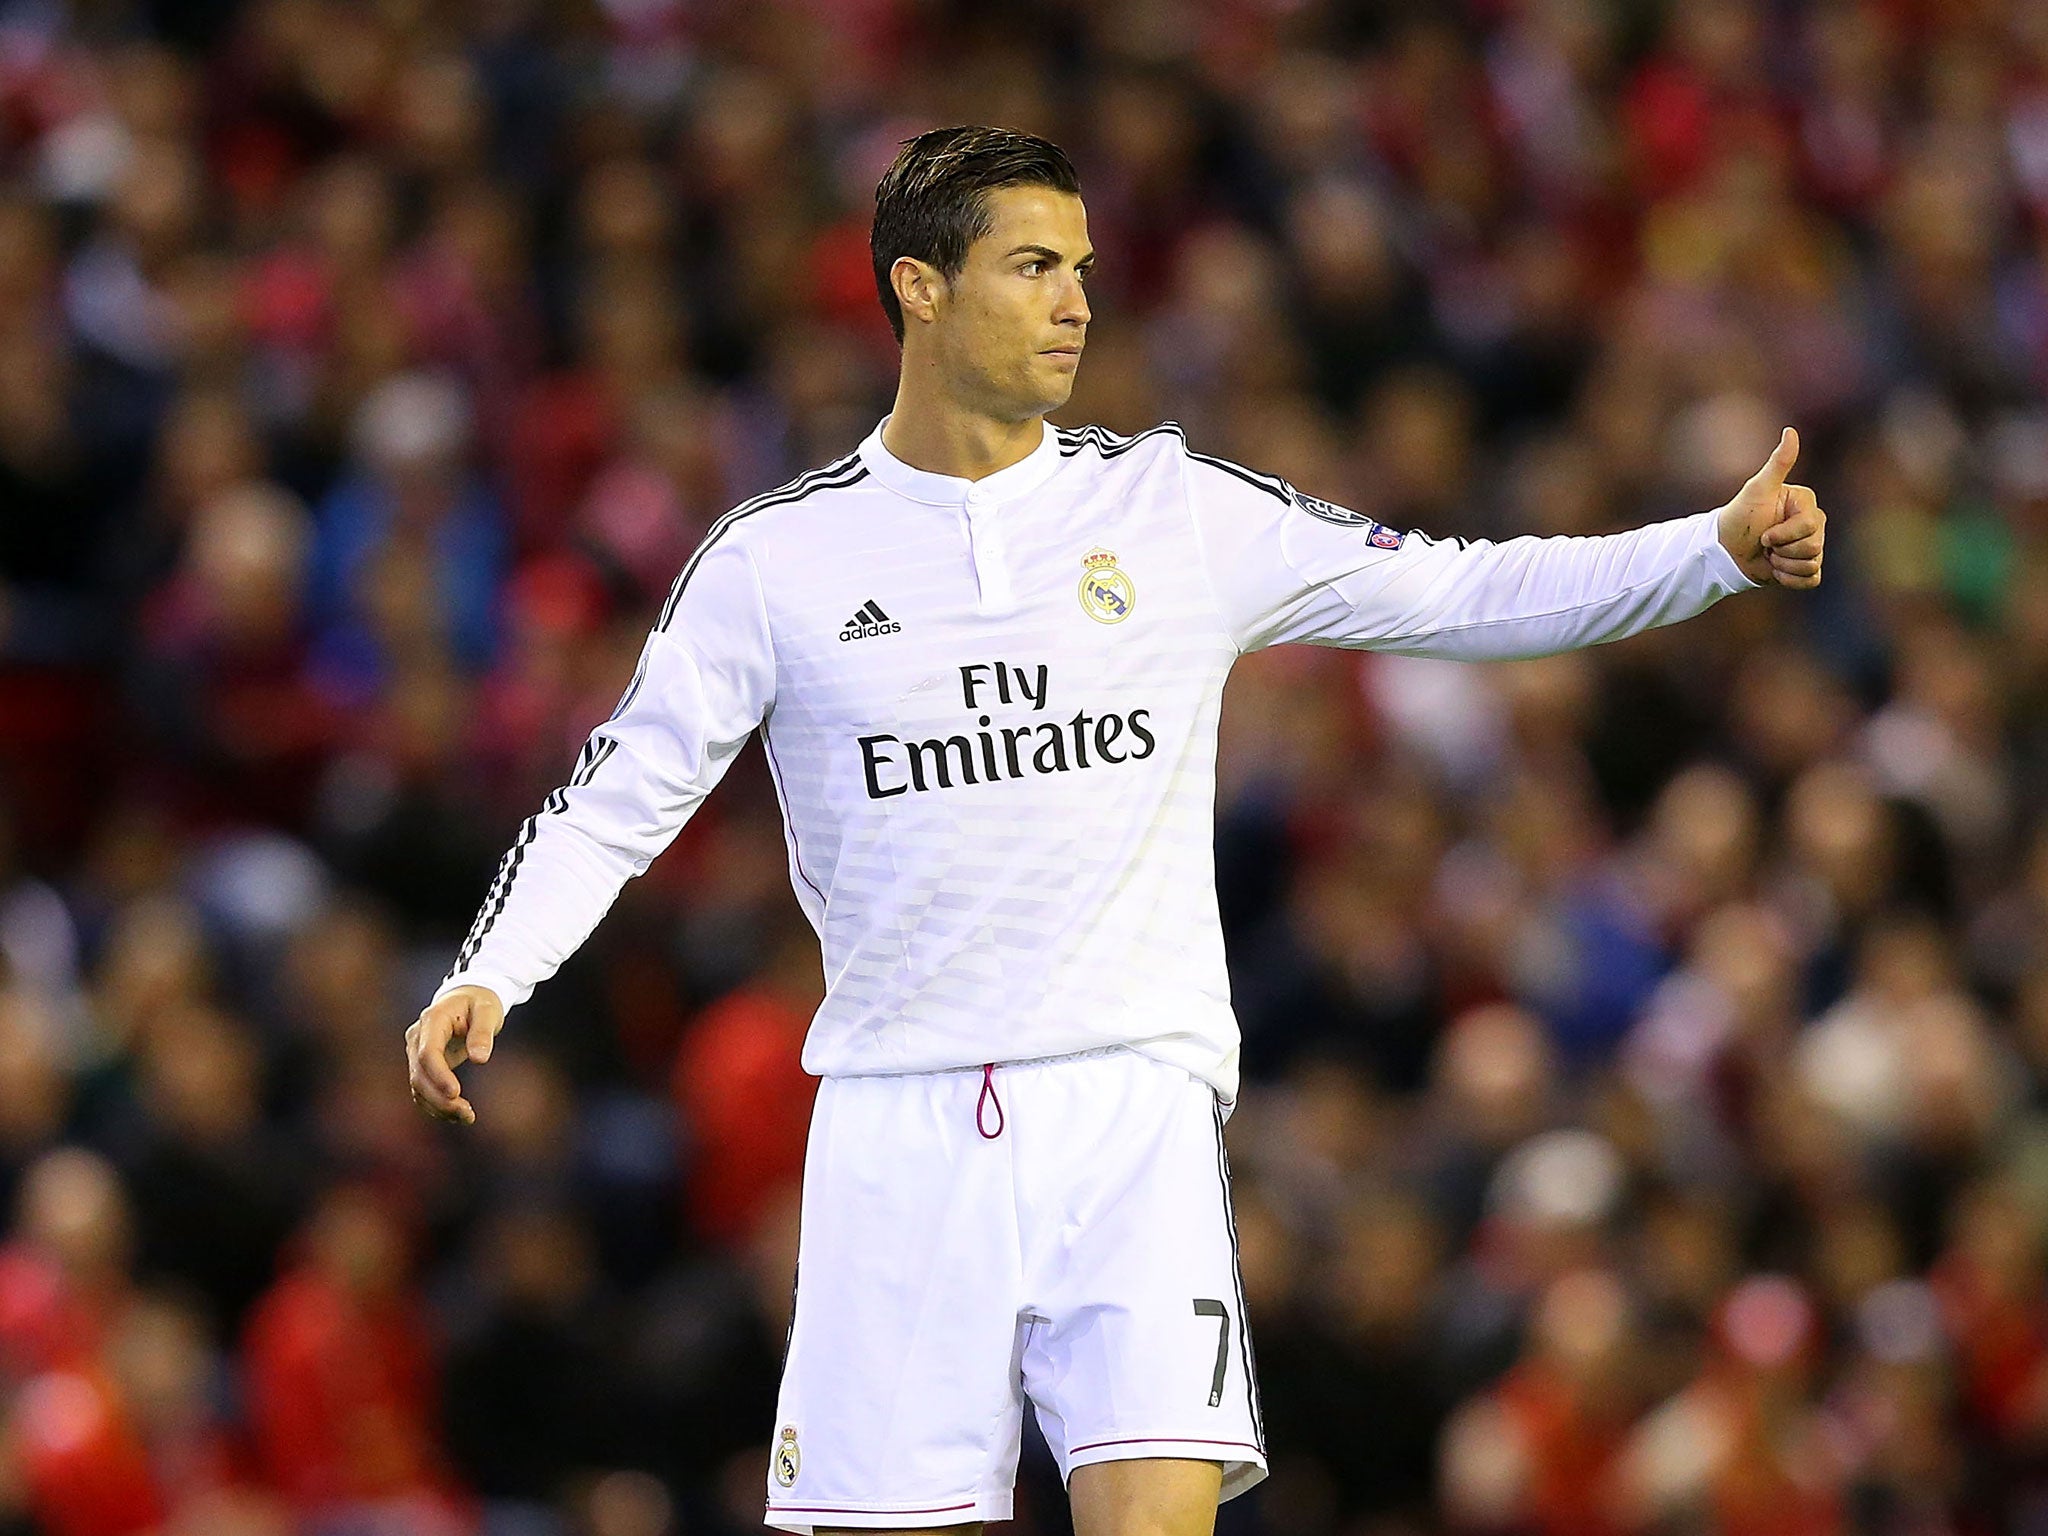 Cristiano Ronaldo excelled for Real Madrid